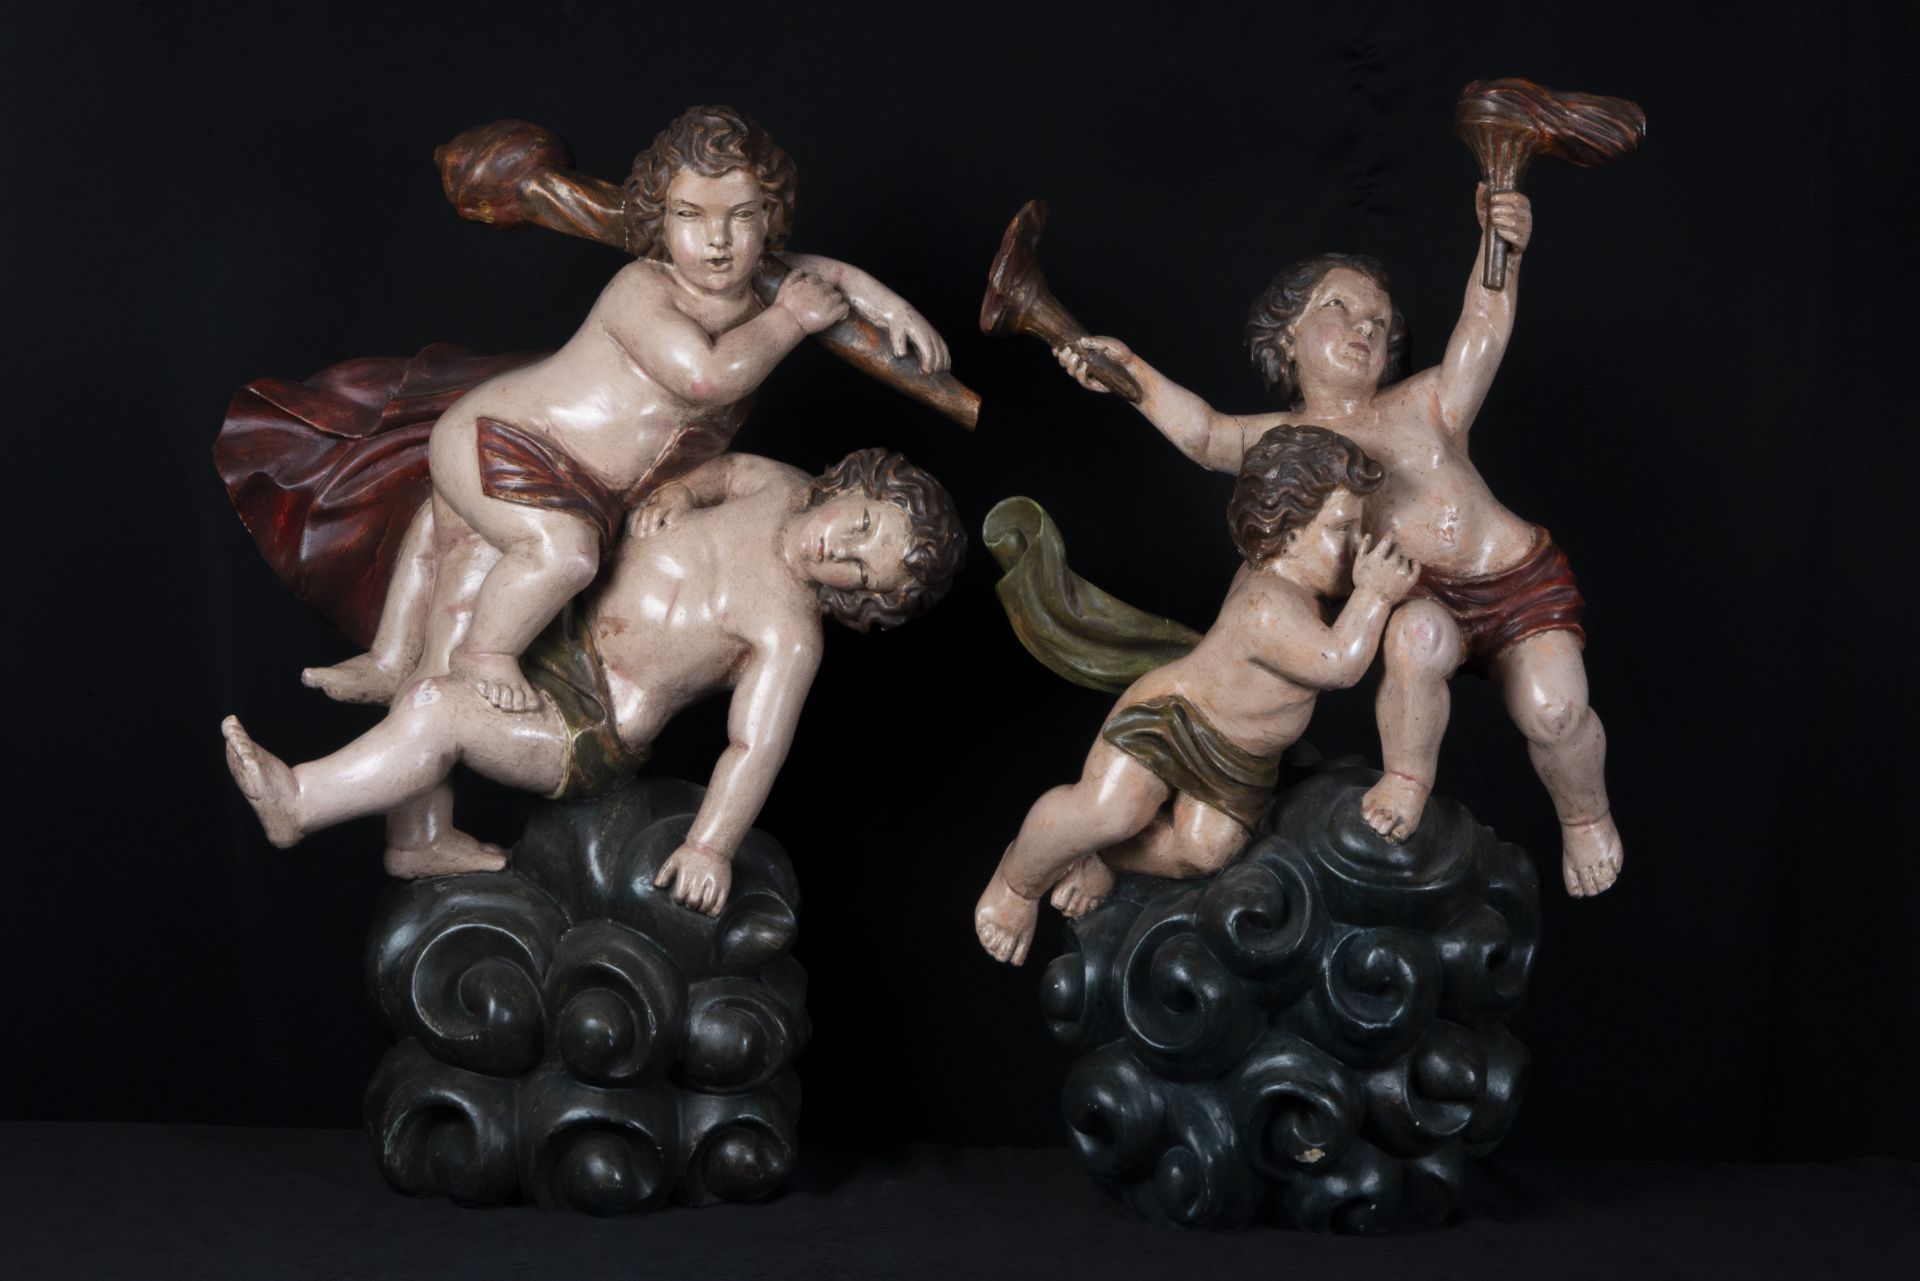 Pair of large colonial sculptural groups representing Cain Killing Abel and Blind Love, late 17th ce